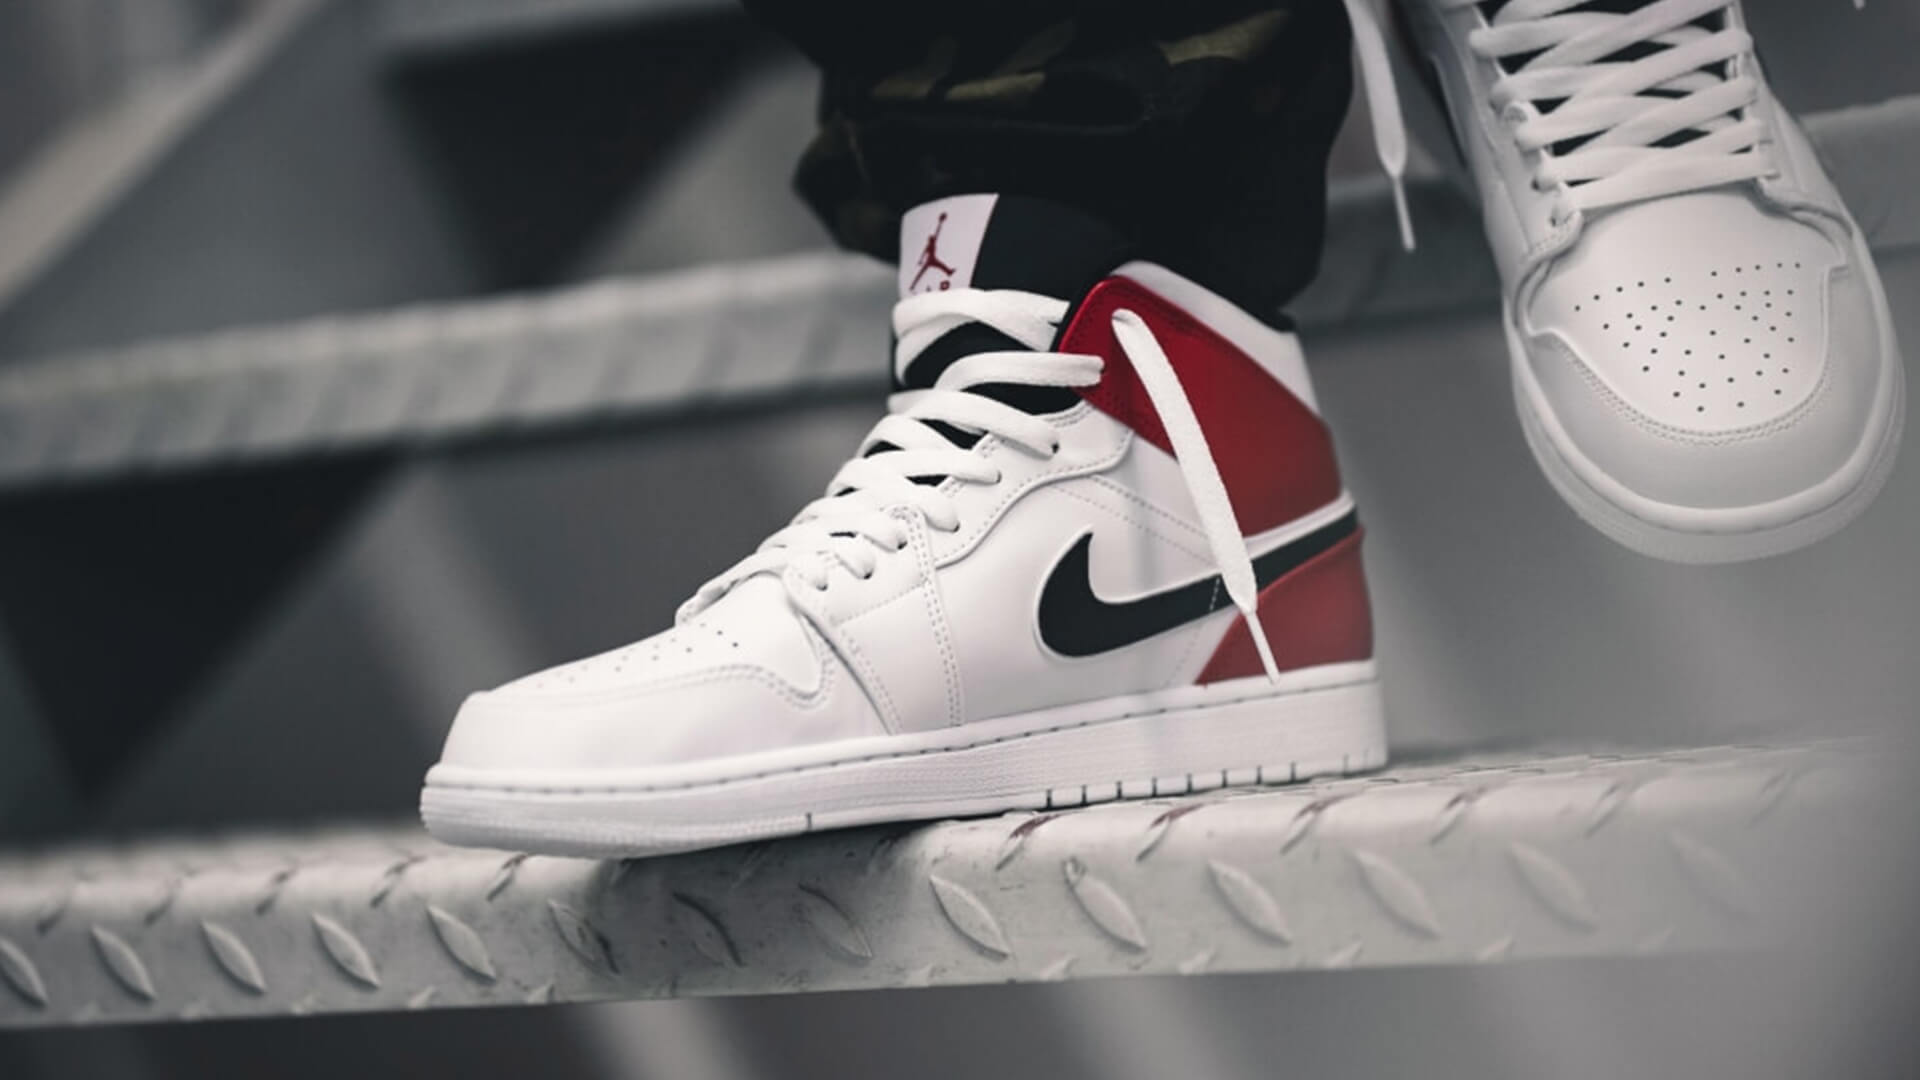 Latest Nike Air Jordan 1 Trainer Releases Next Drops The Sole